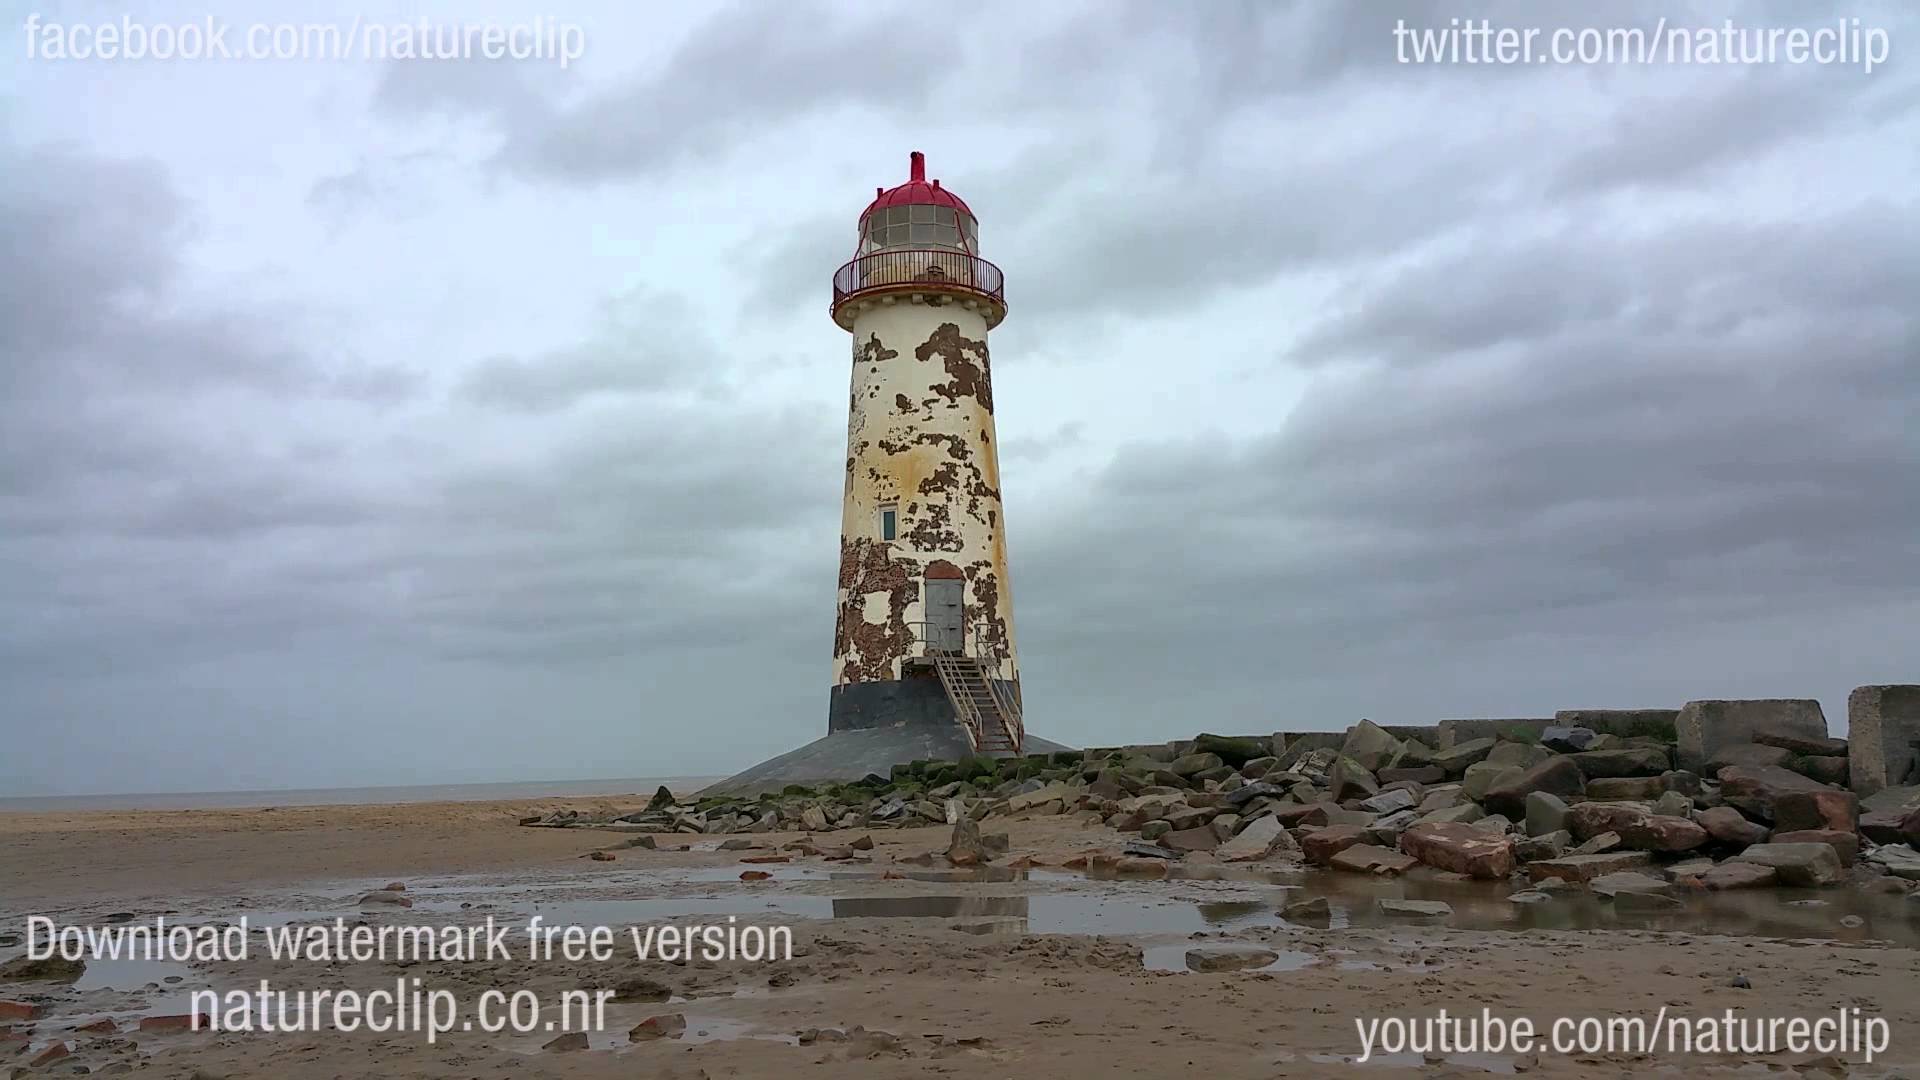 FREE stock footage - Old Lighthouse CC-BY NatureClip - YouTube